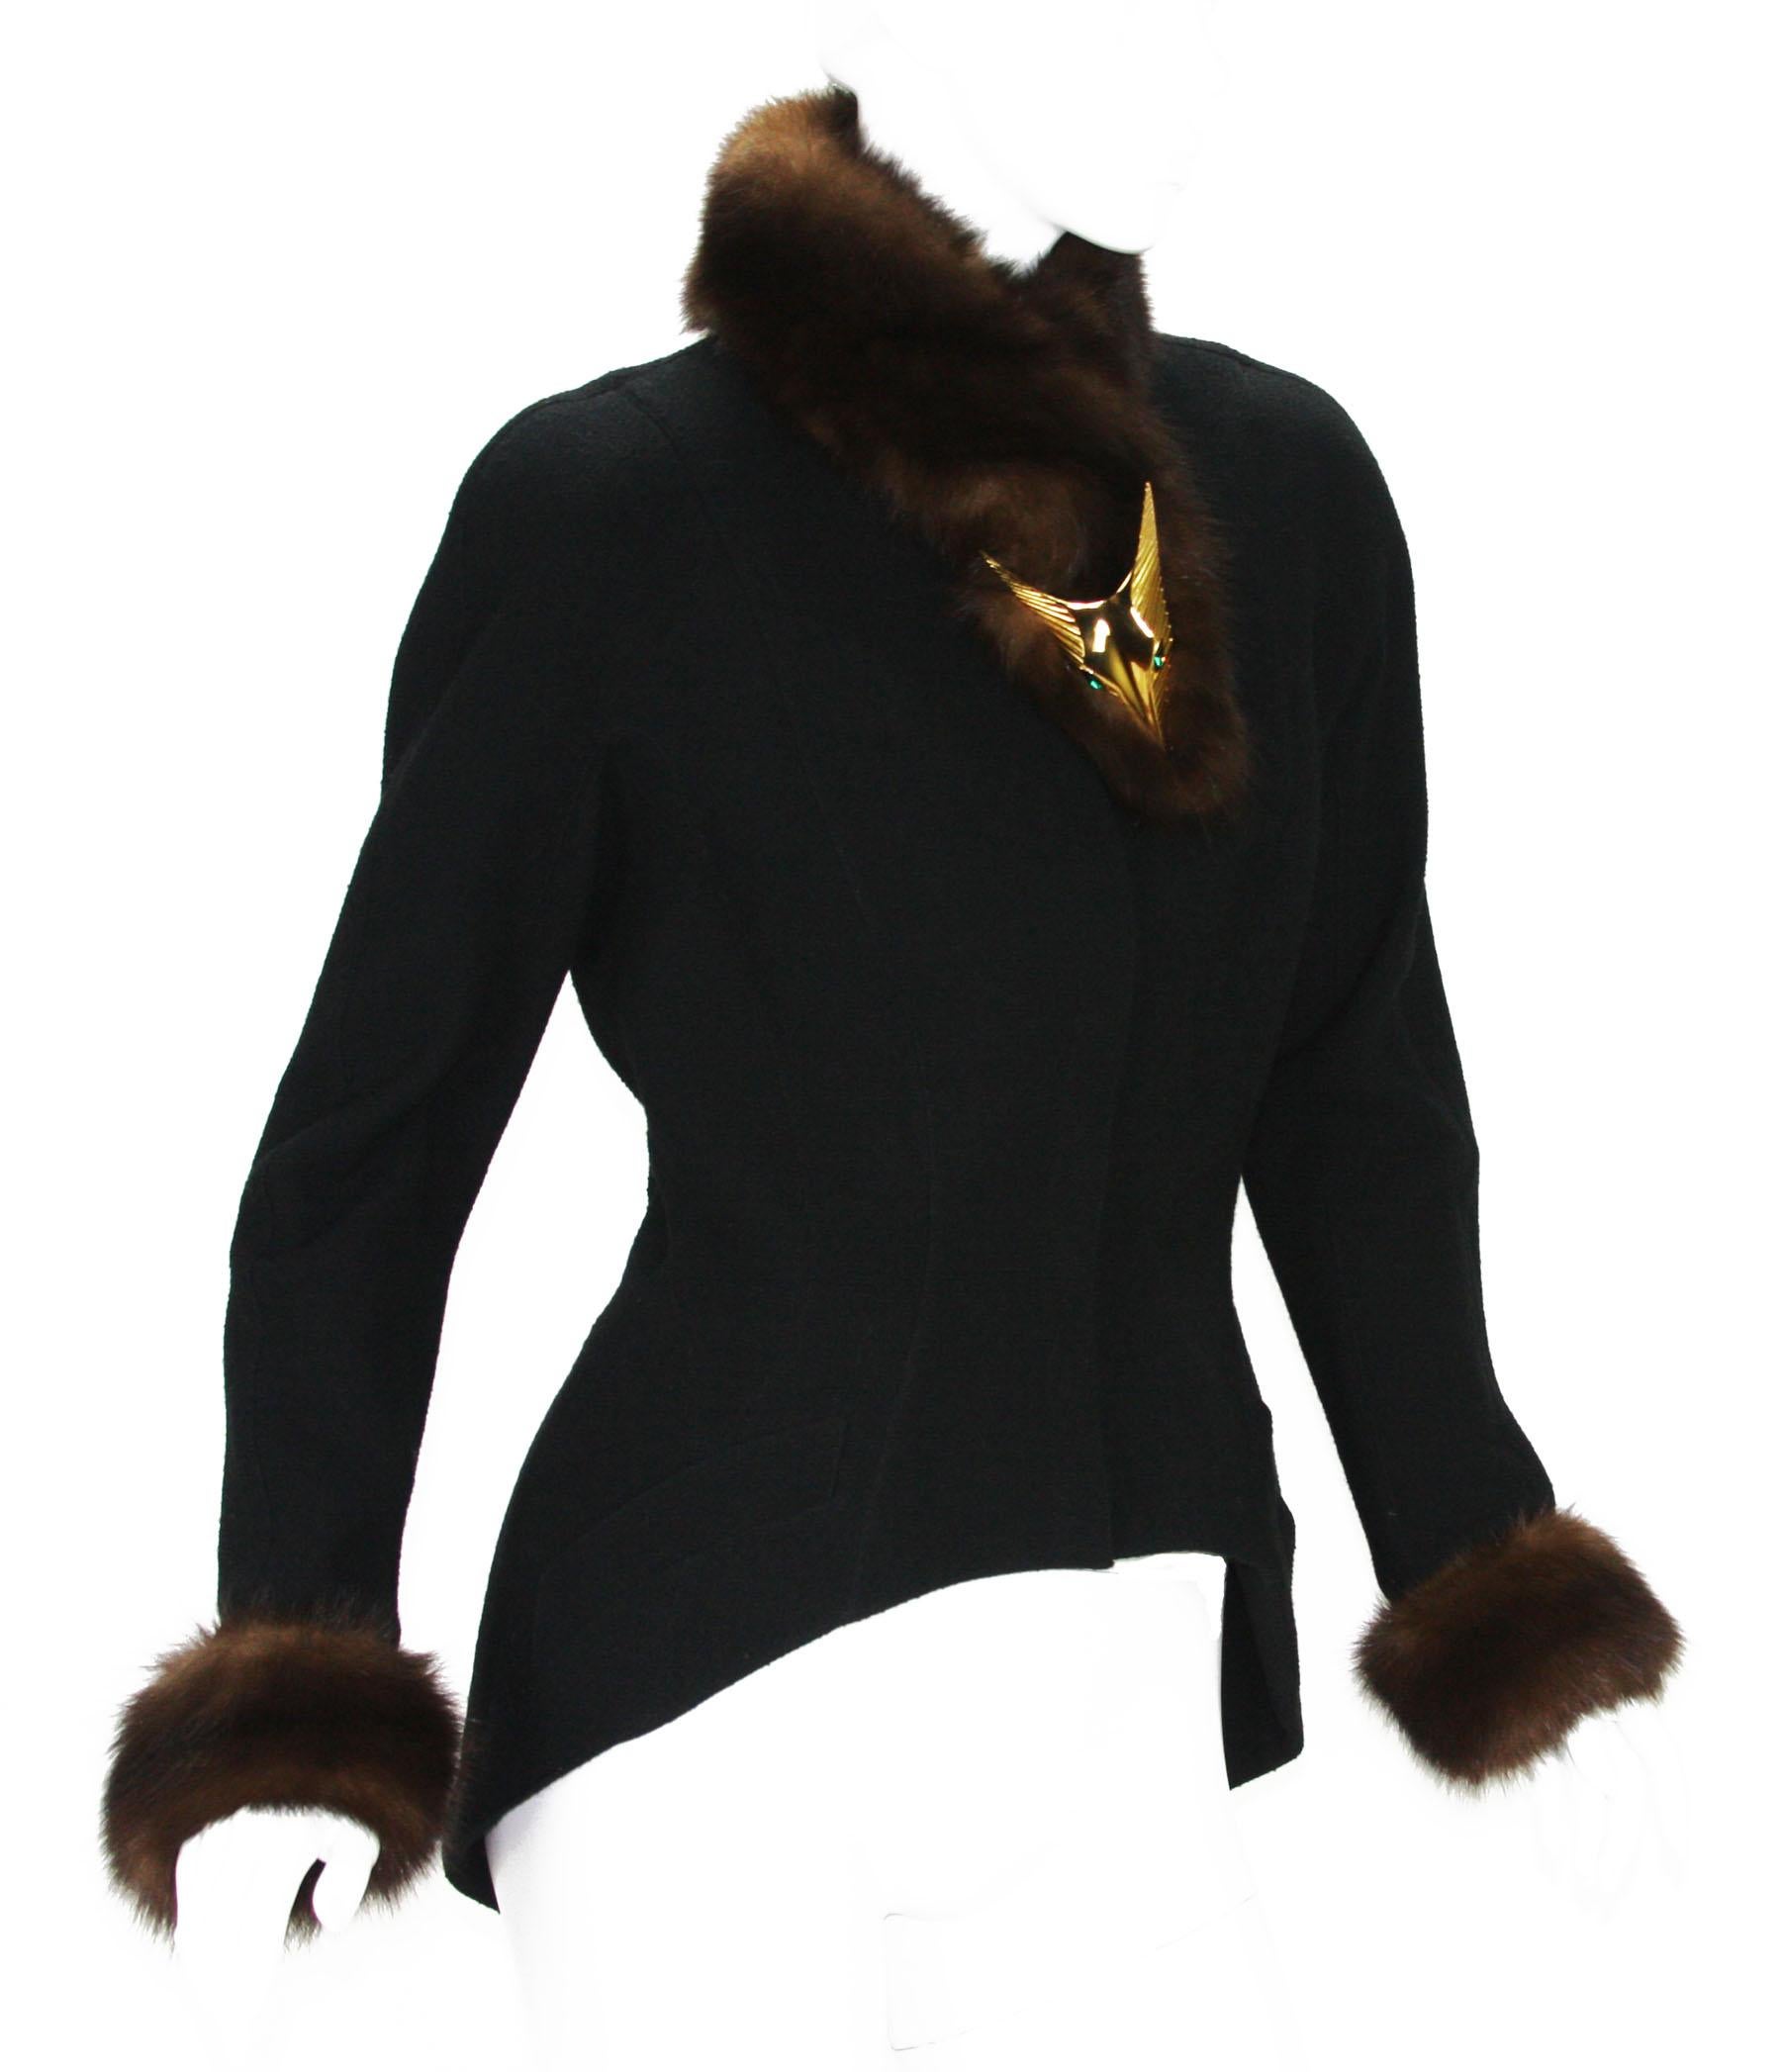  Thierry Mugler presents exquisite French craftsmanship with this exclusive brooch. Tailcoat blazer provides a dramatic silhouette, tailored to perfection. Featuring a mink collar with metal gold-tone fox face, snaps closure, little pockets, padded